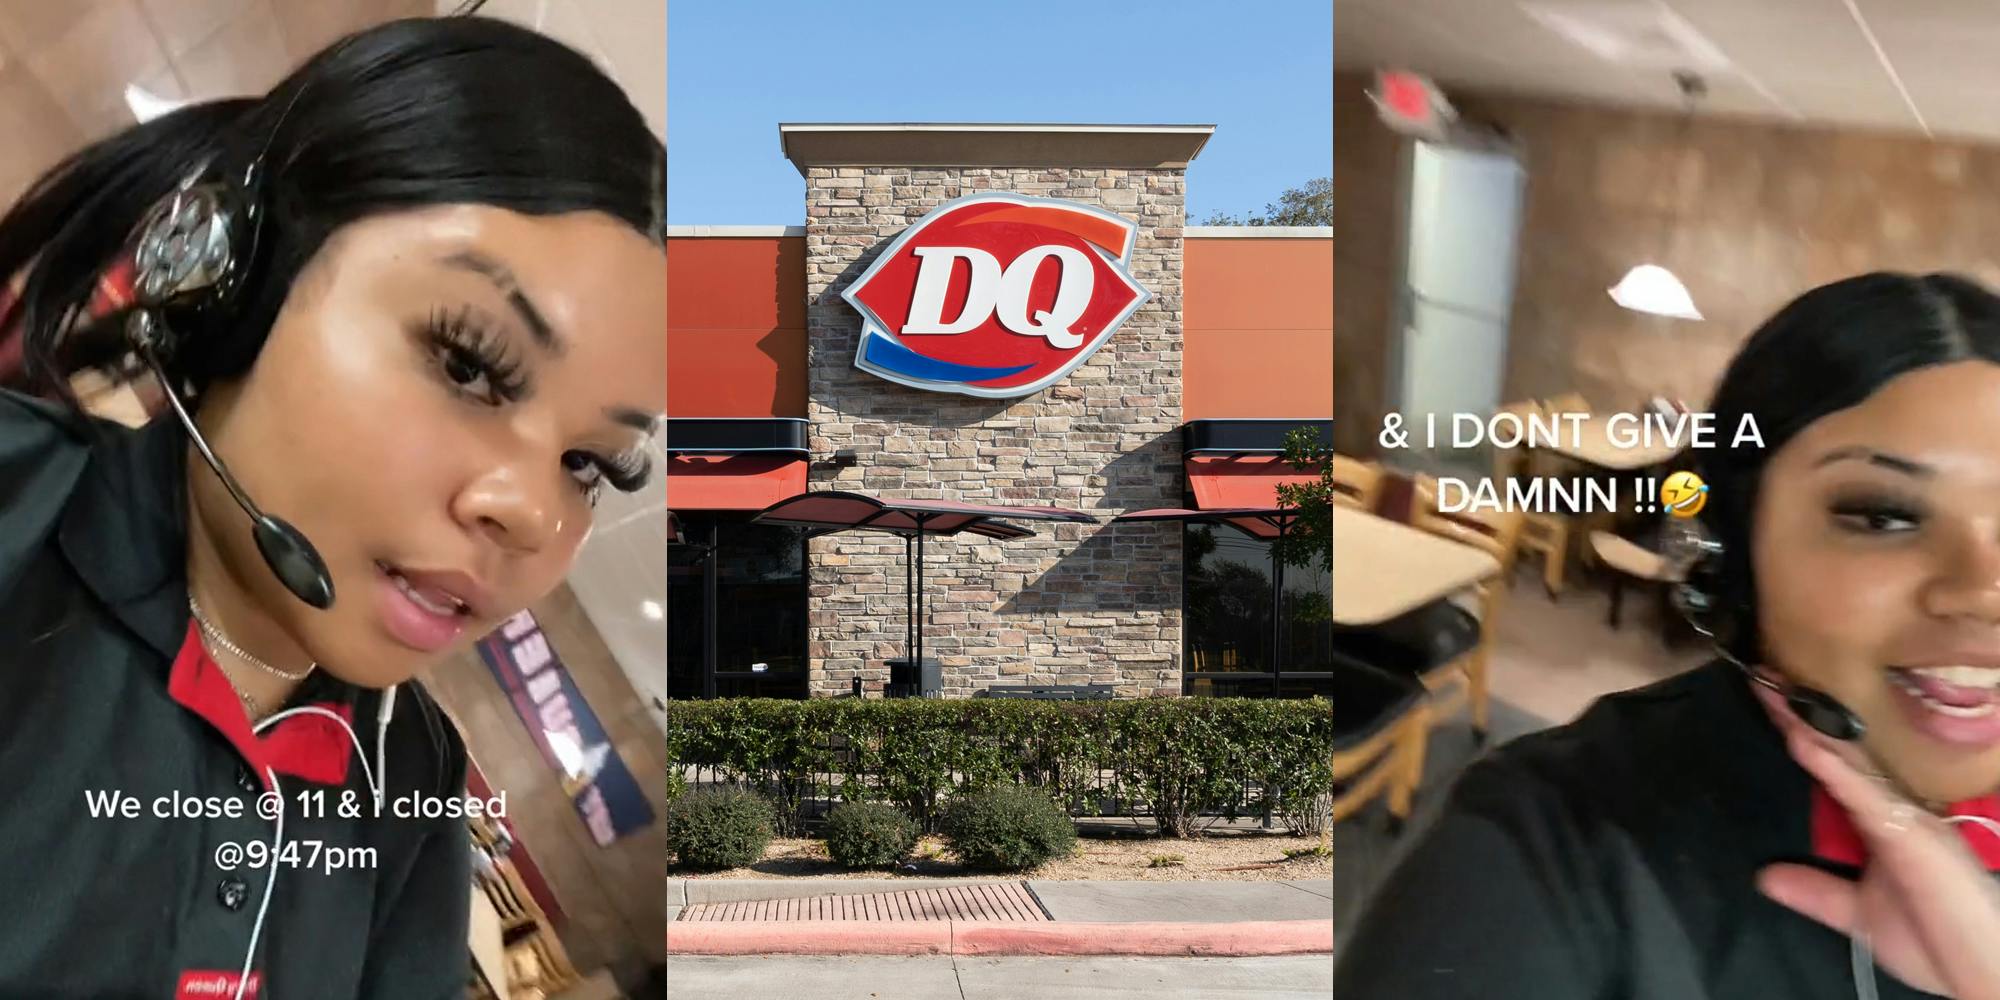 DQ employee with caption "We close @ 11 & i closed @9:47pm" (l) Dairy Queen restaurant with sign (c) DQ employee speaking caption "& I DONT GIVE A DAMN" (r)